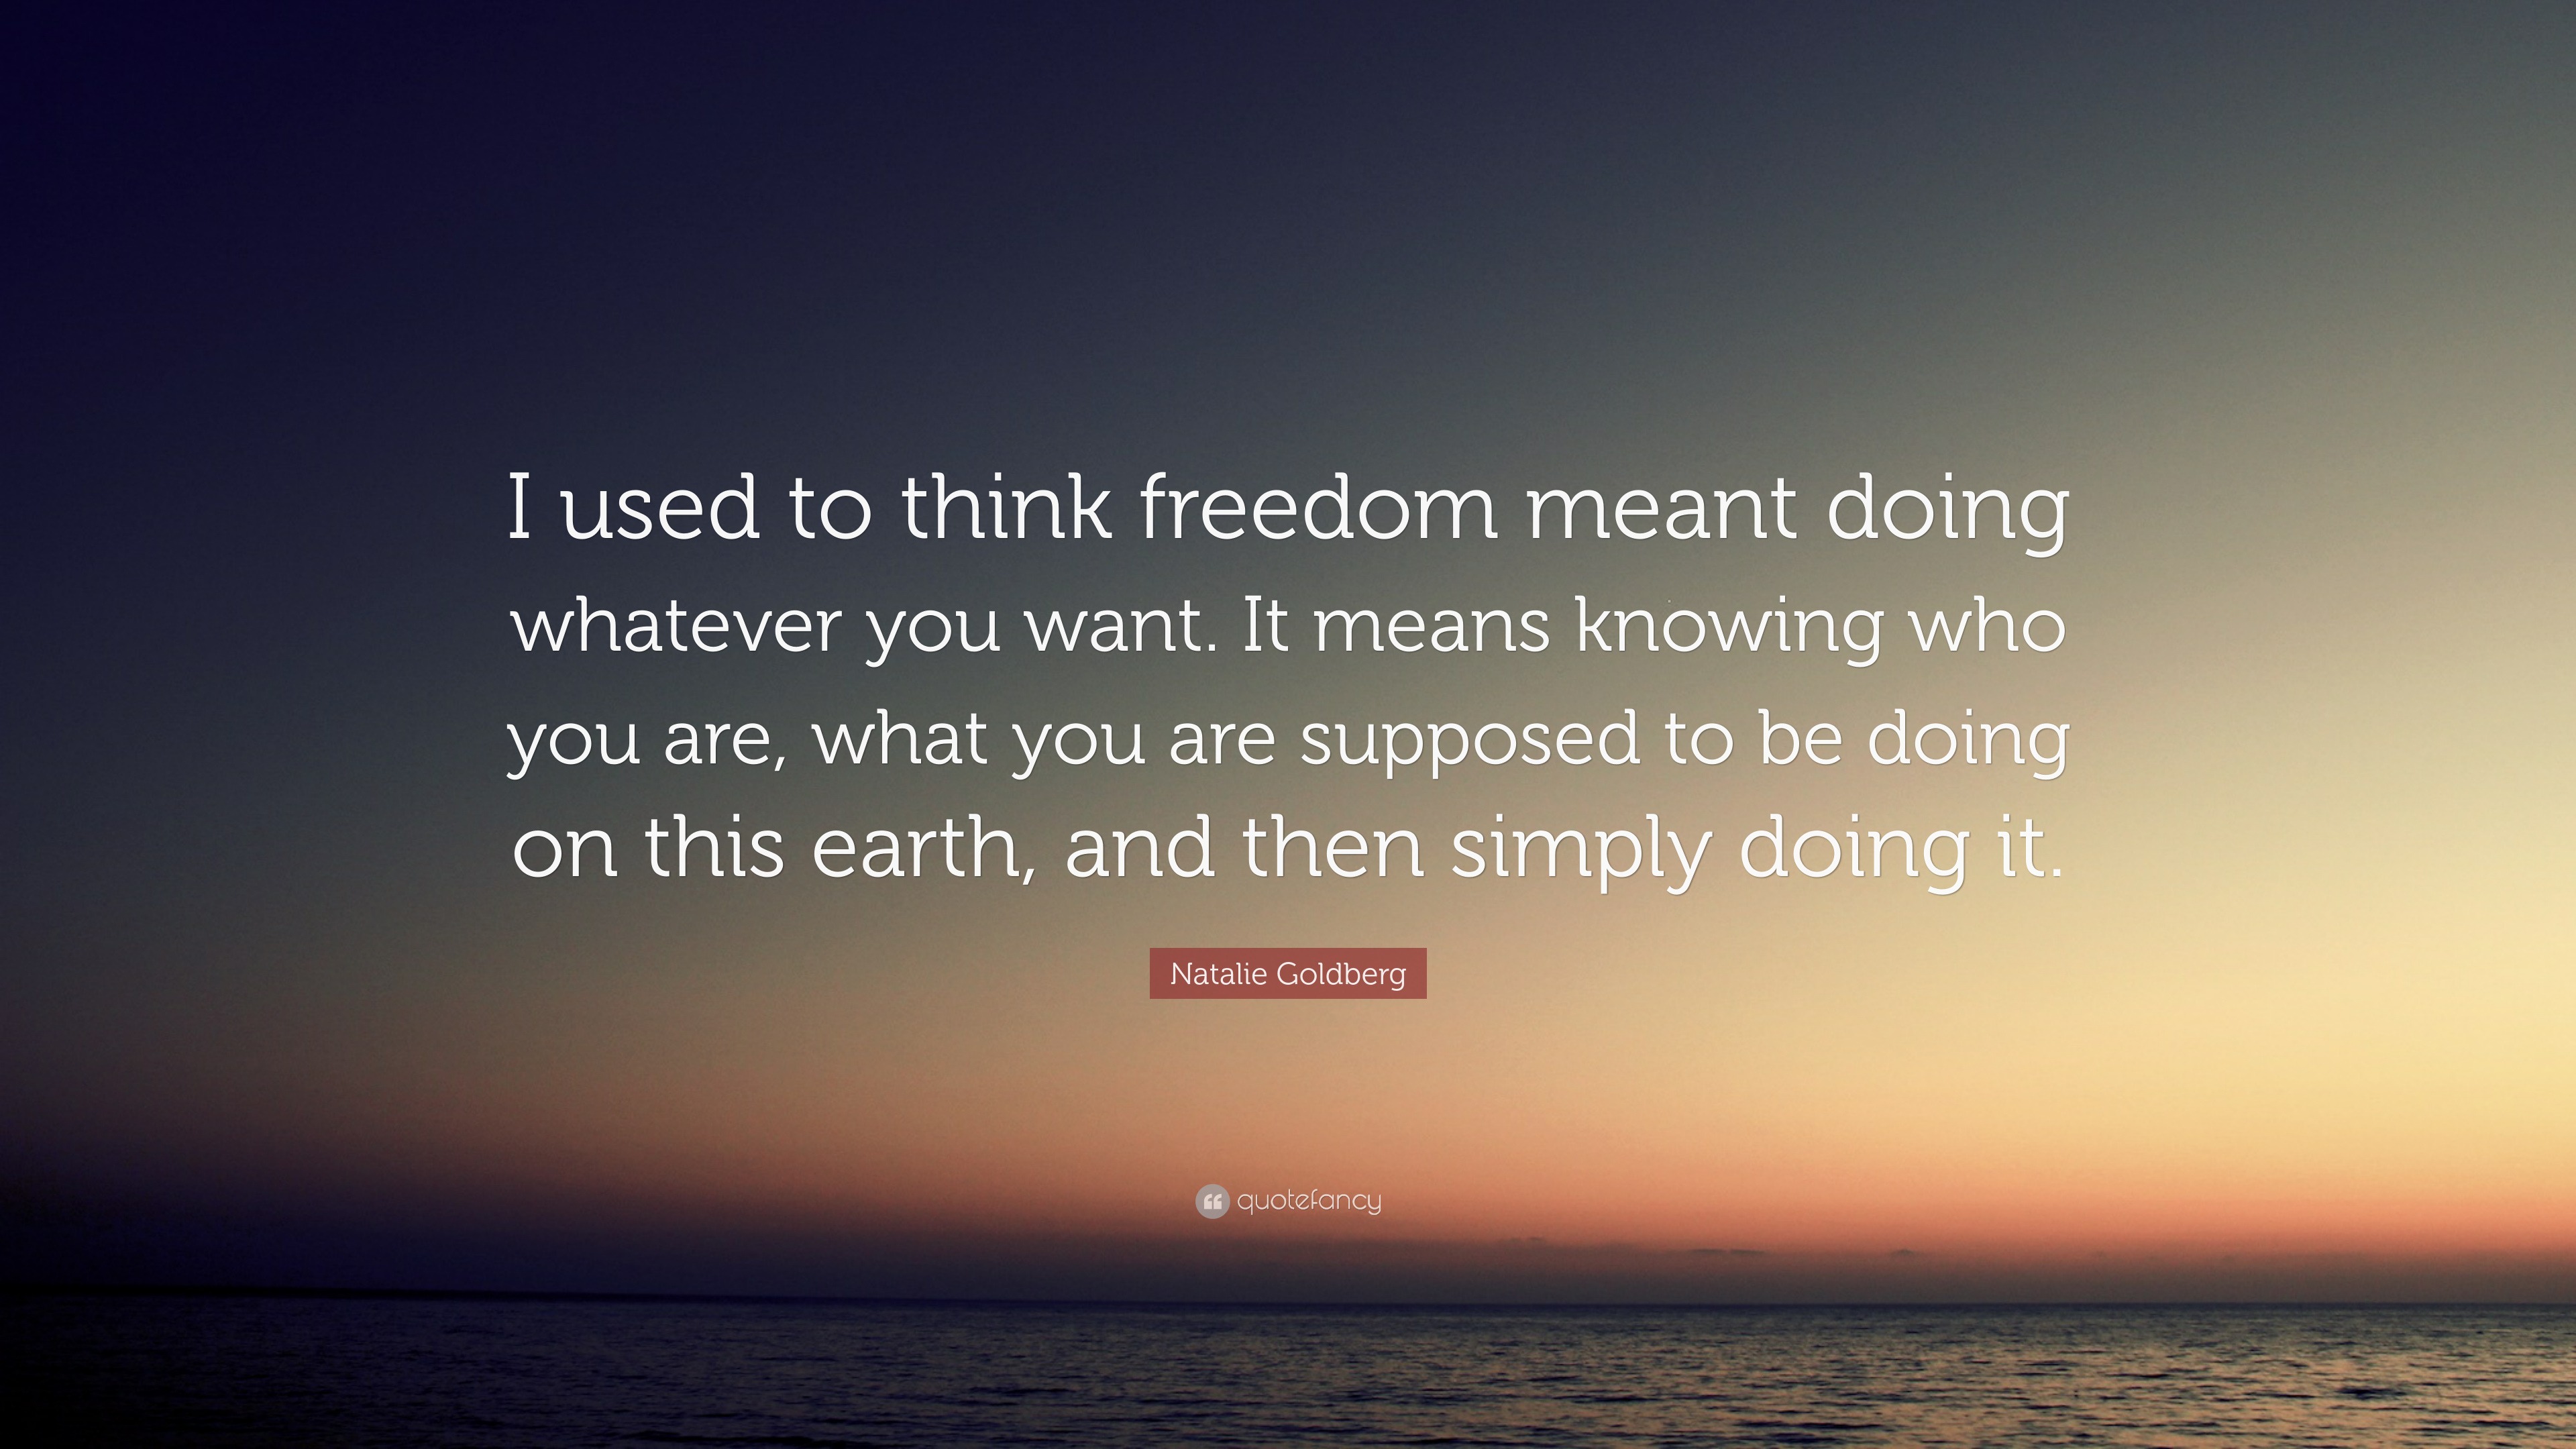 Natalie Goldberg Quote: “I used to think freedom meant doing whatever you want. It means knowing are, what you are supposed to be doing o...”